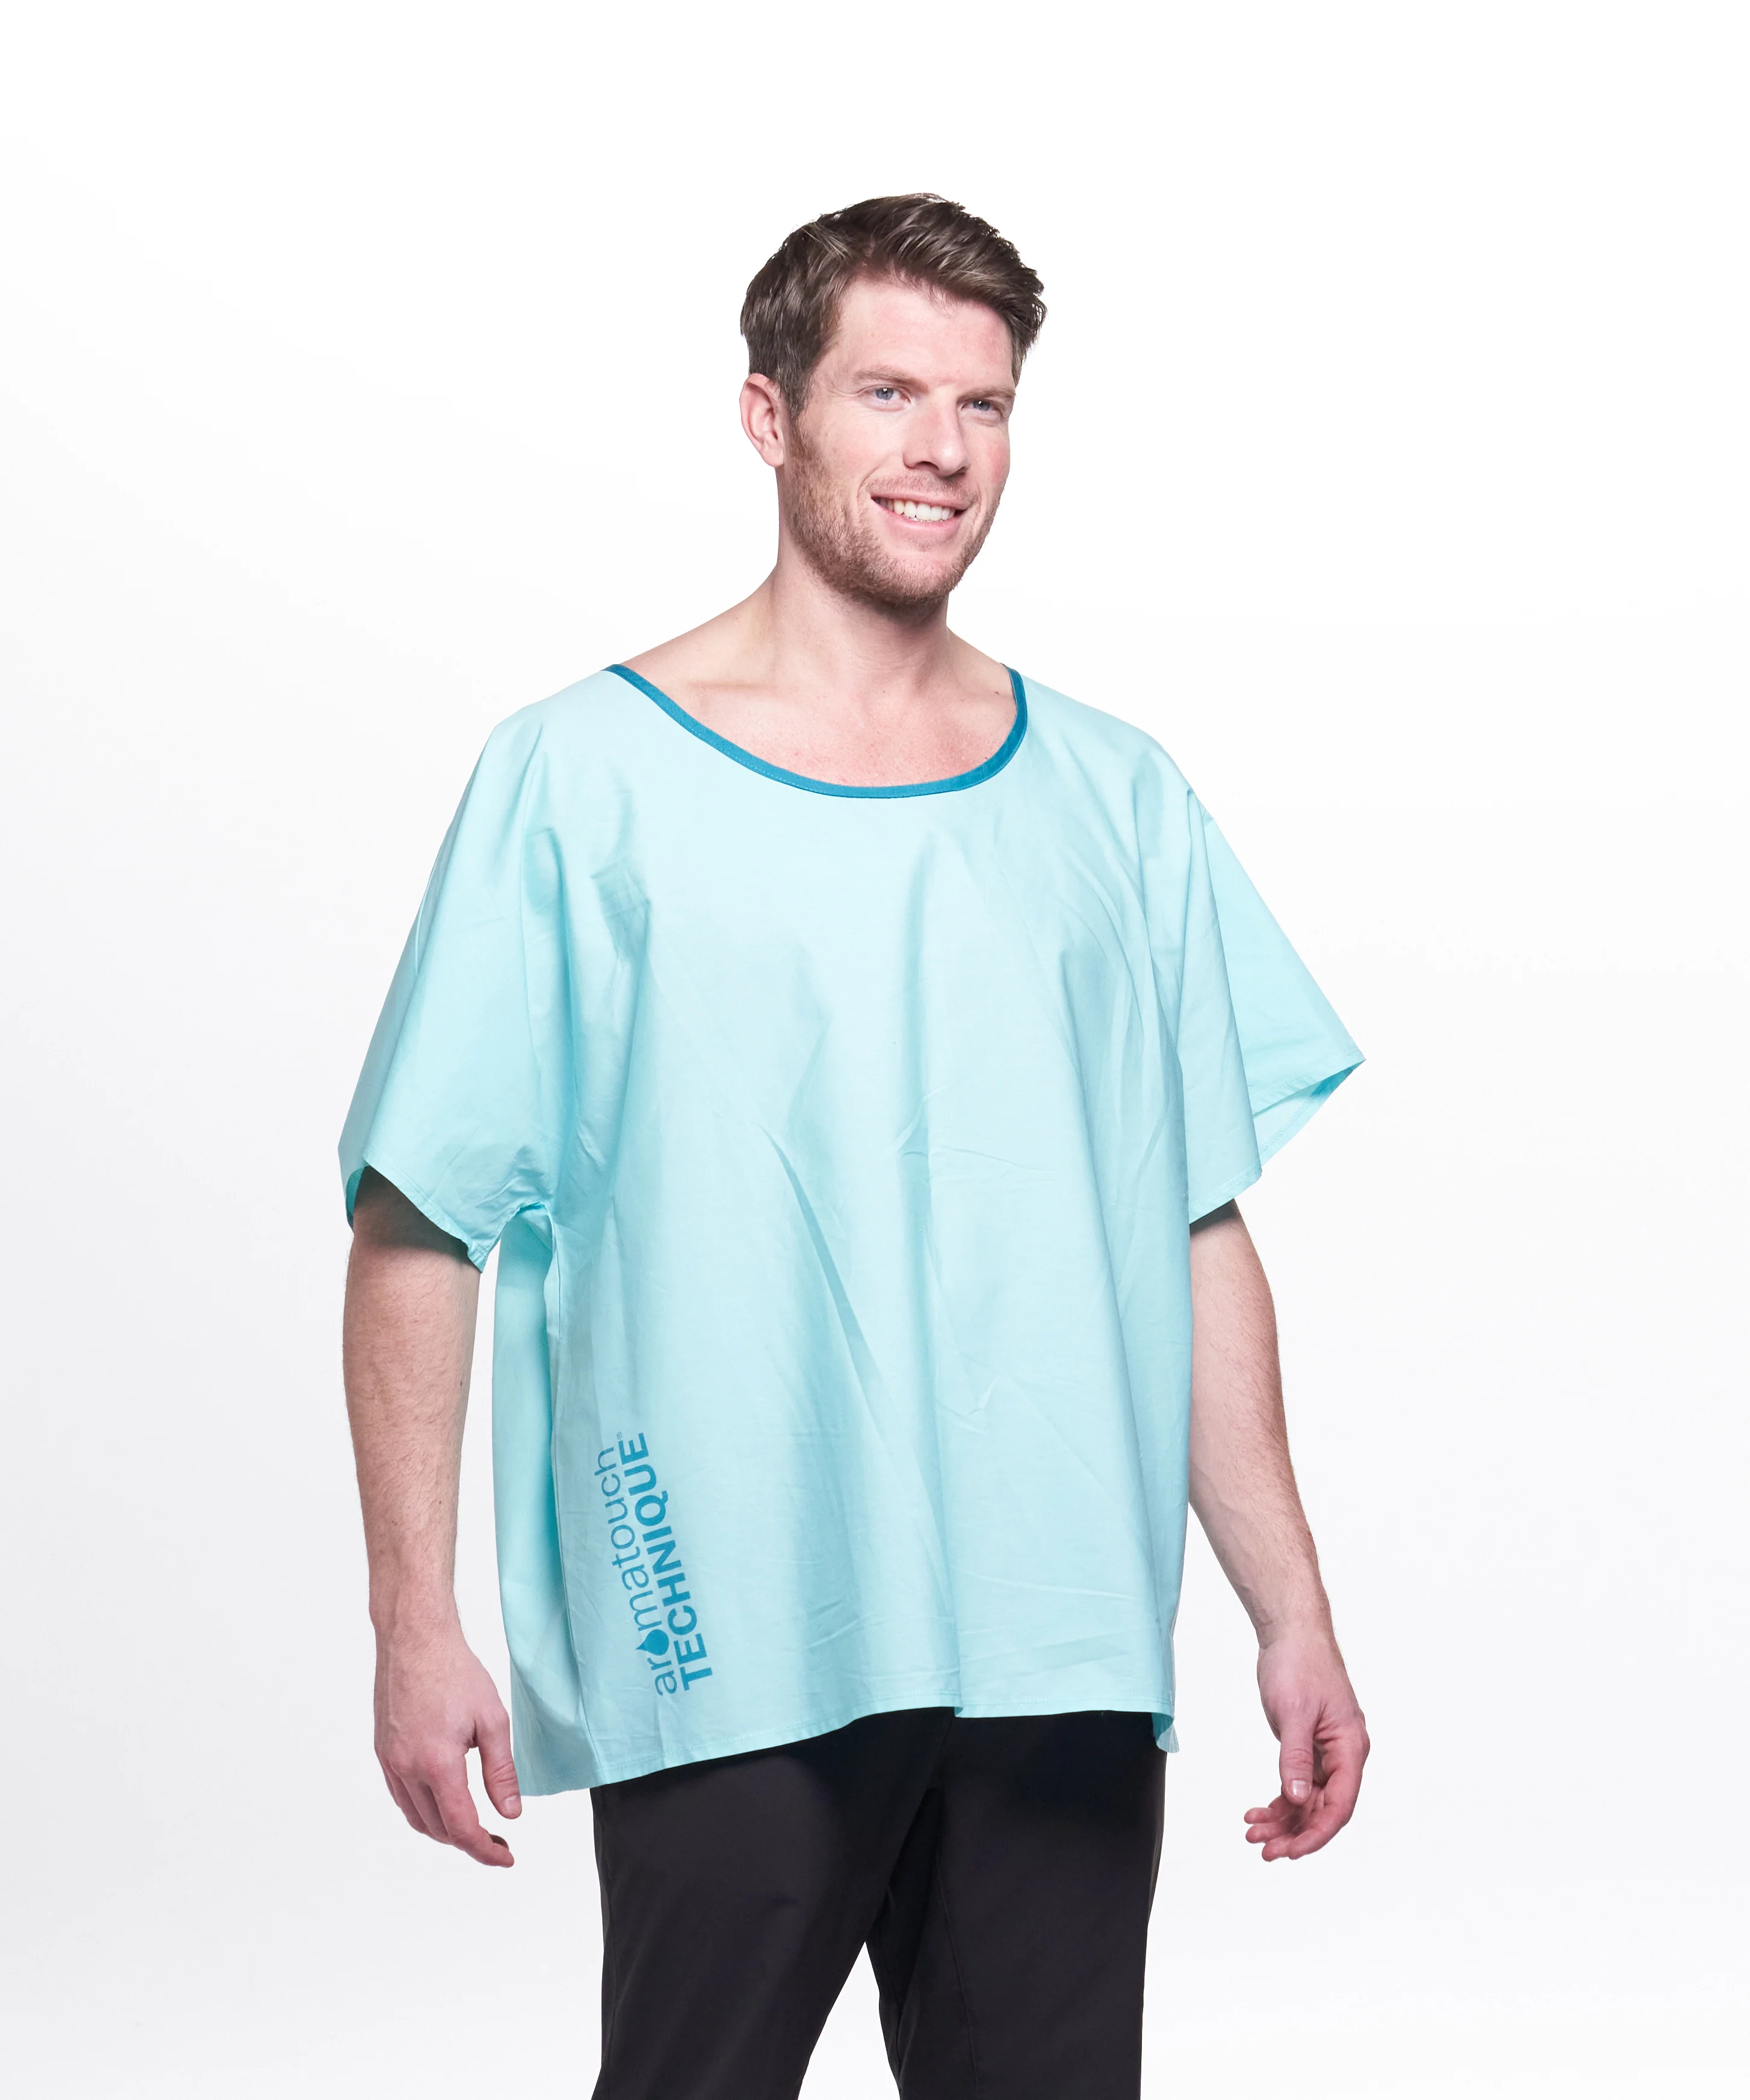 AromaTouch Reusable Gown - Teal